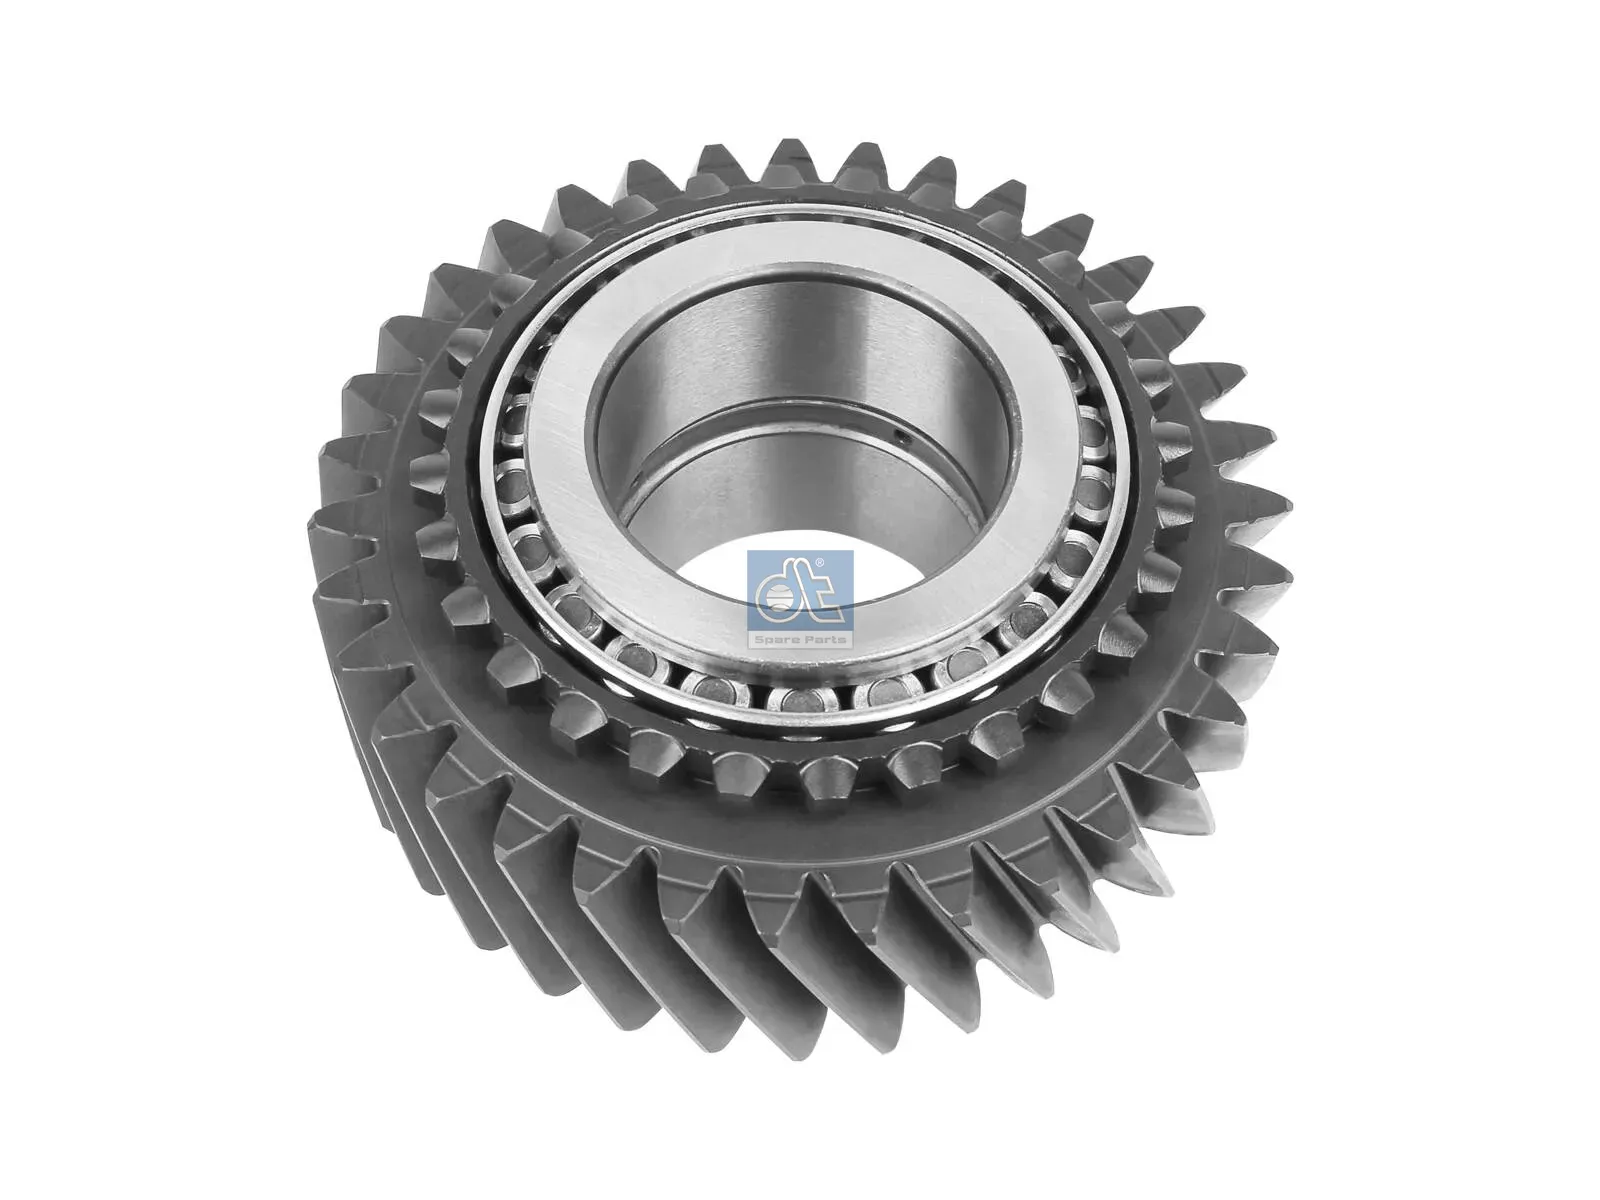 Gear, with bearing